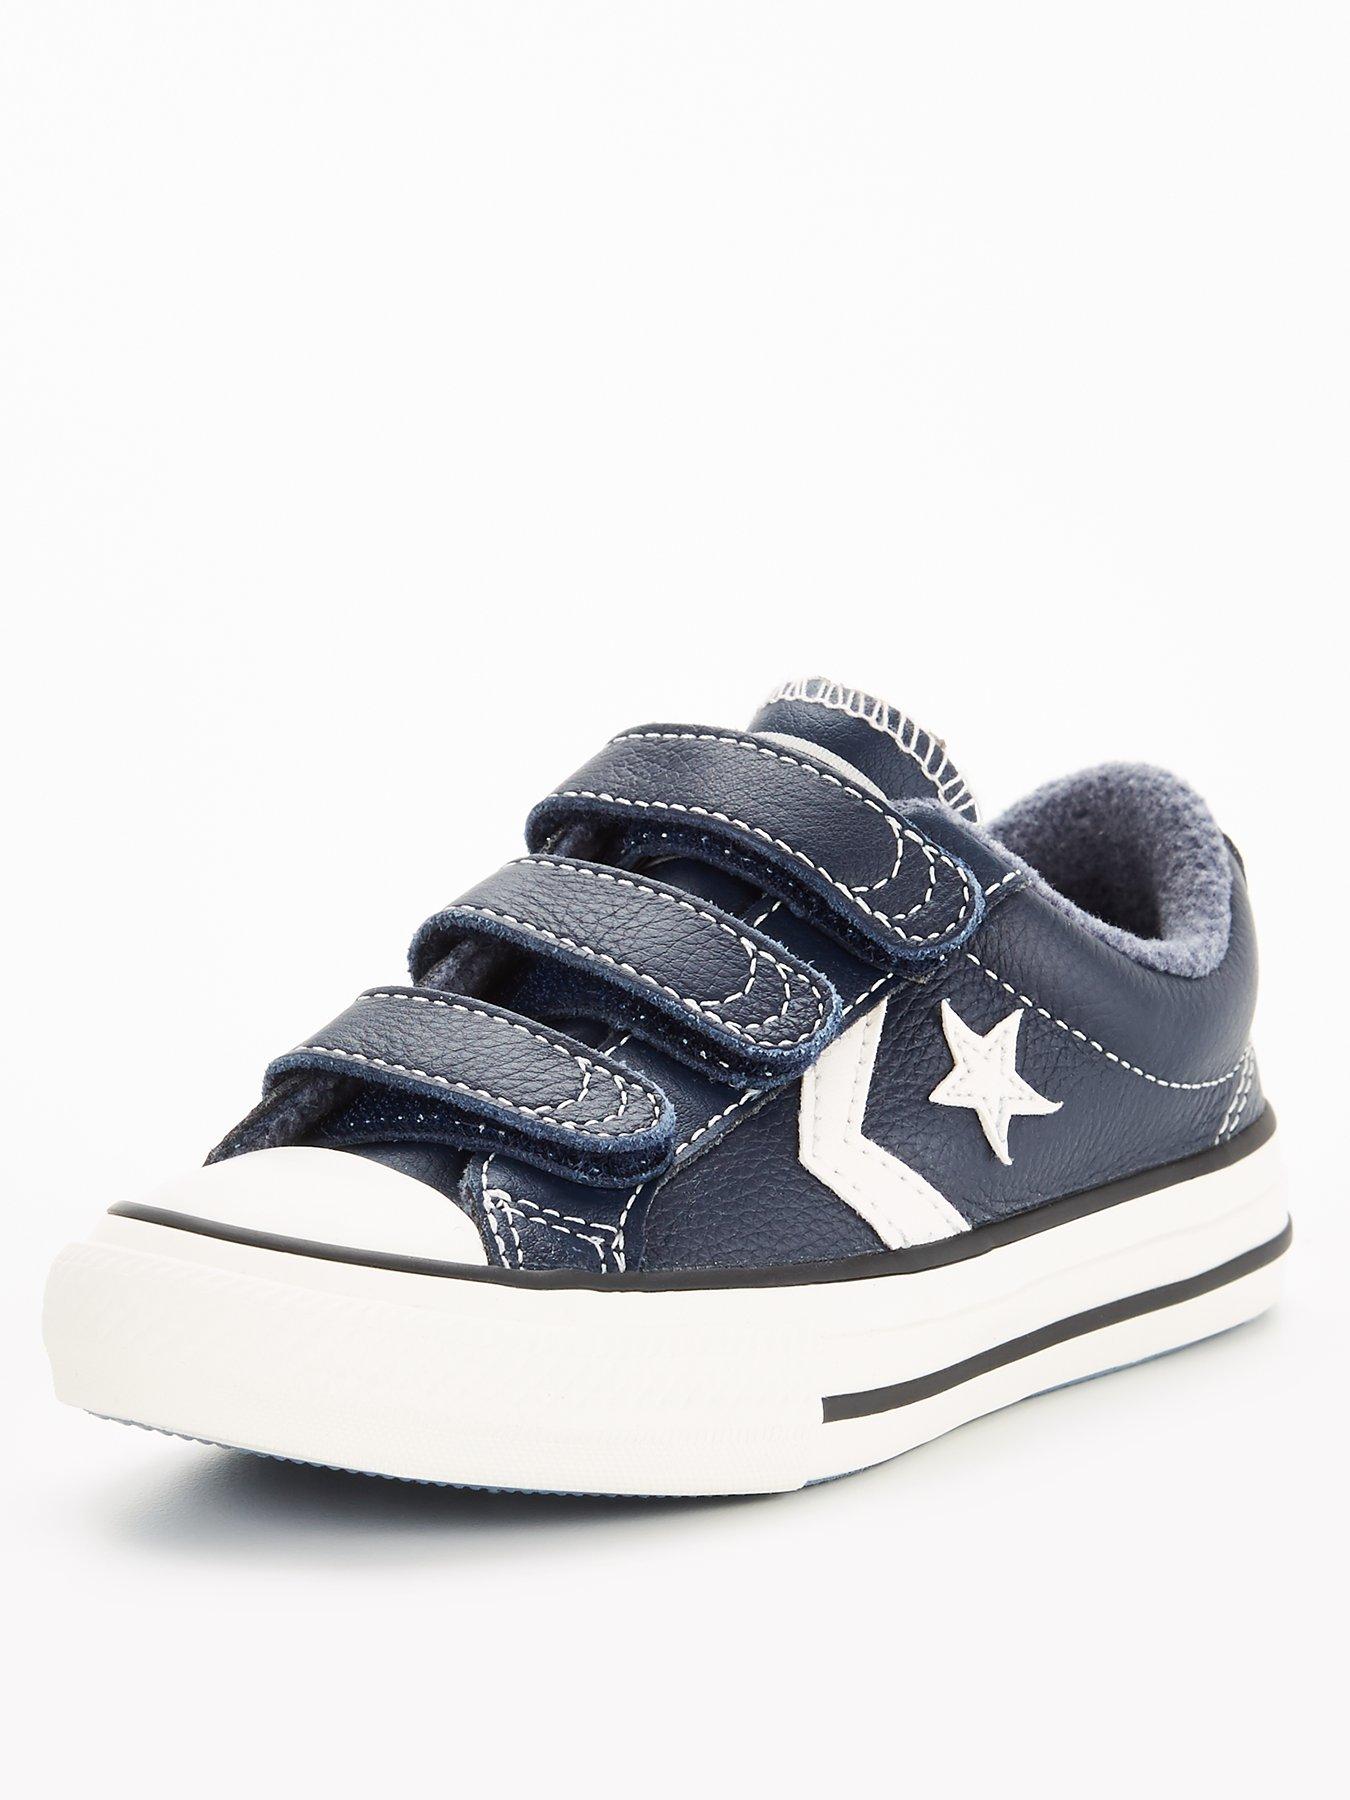 childrens leather converse